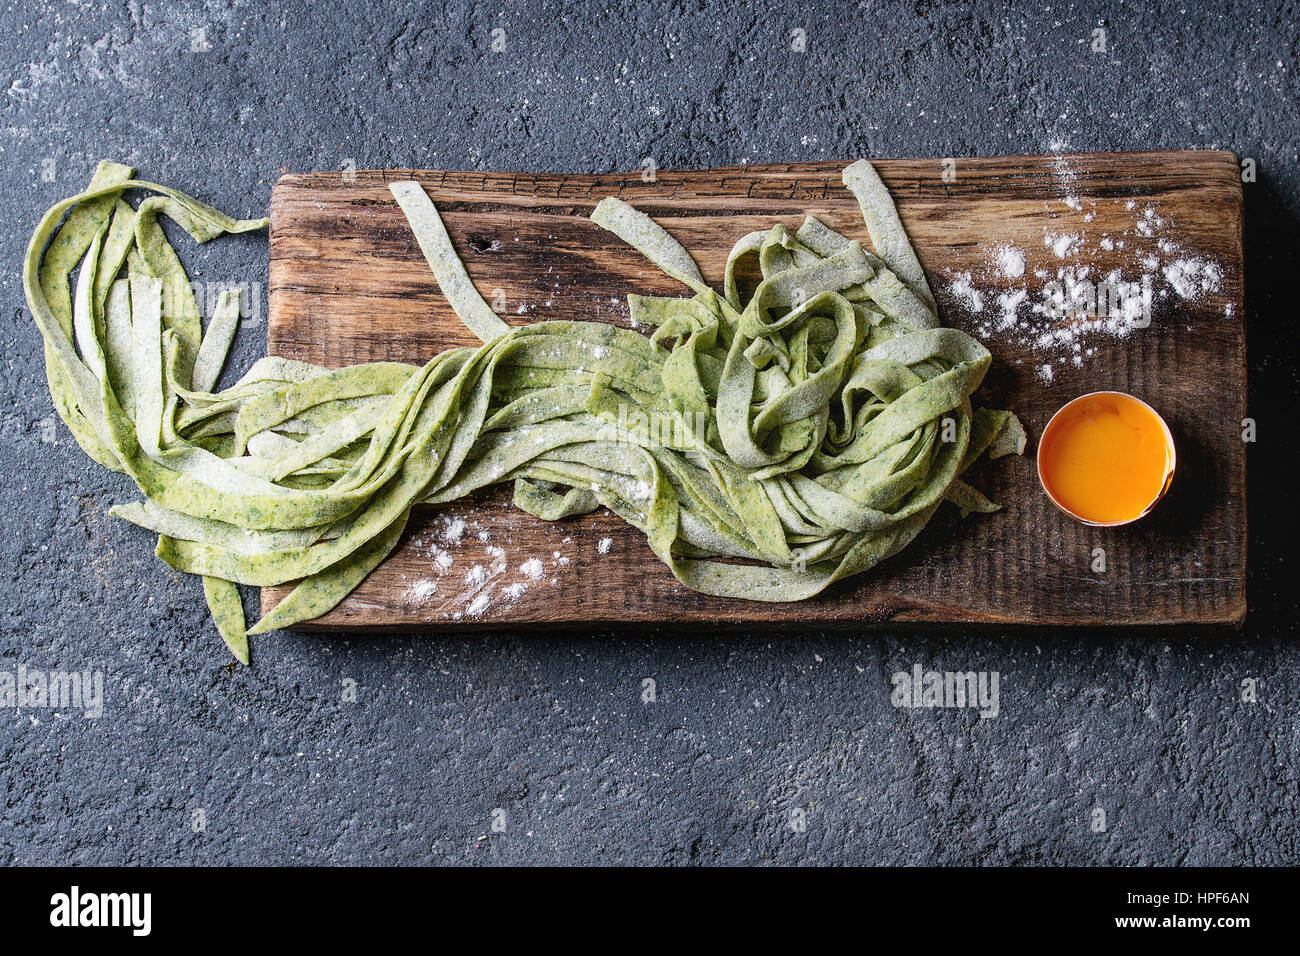 Fresh raw uncooked homemade green spinach pasta tagliatelle with egg yolk and flour on wooden chopping cutting board over dark texture concrete backgr Stock Photo